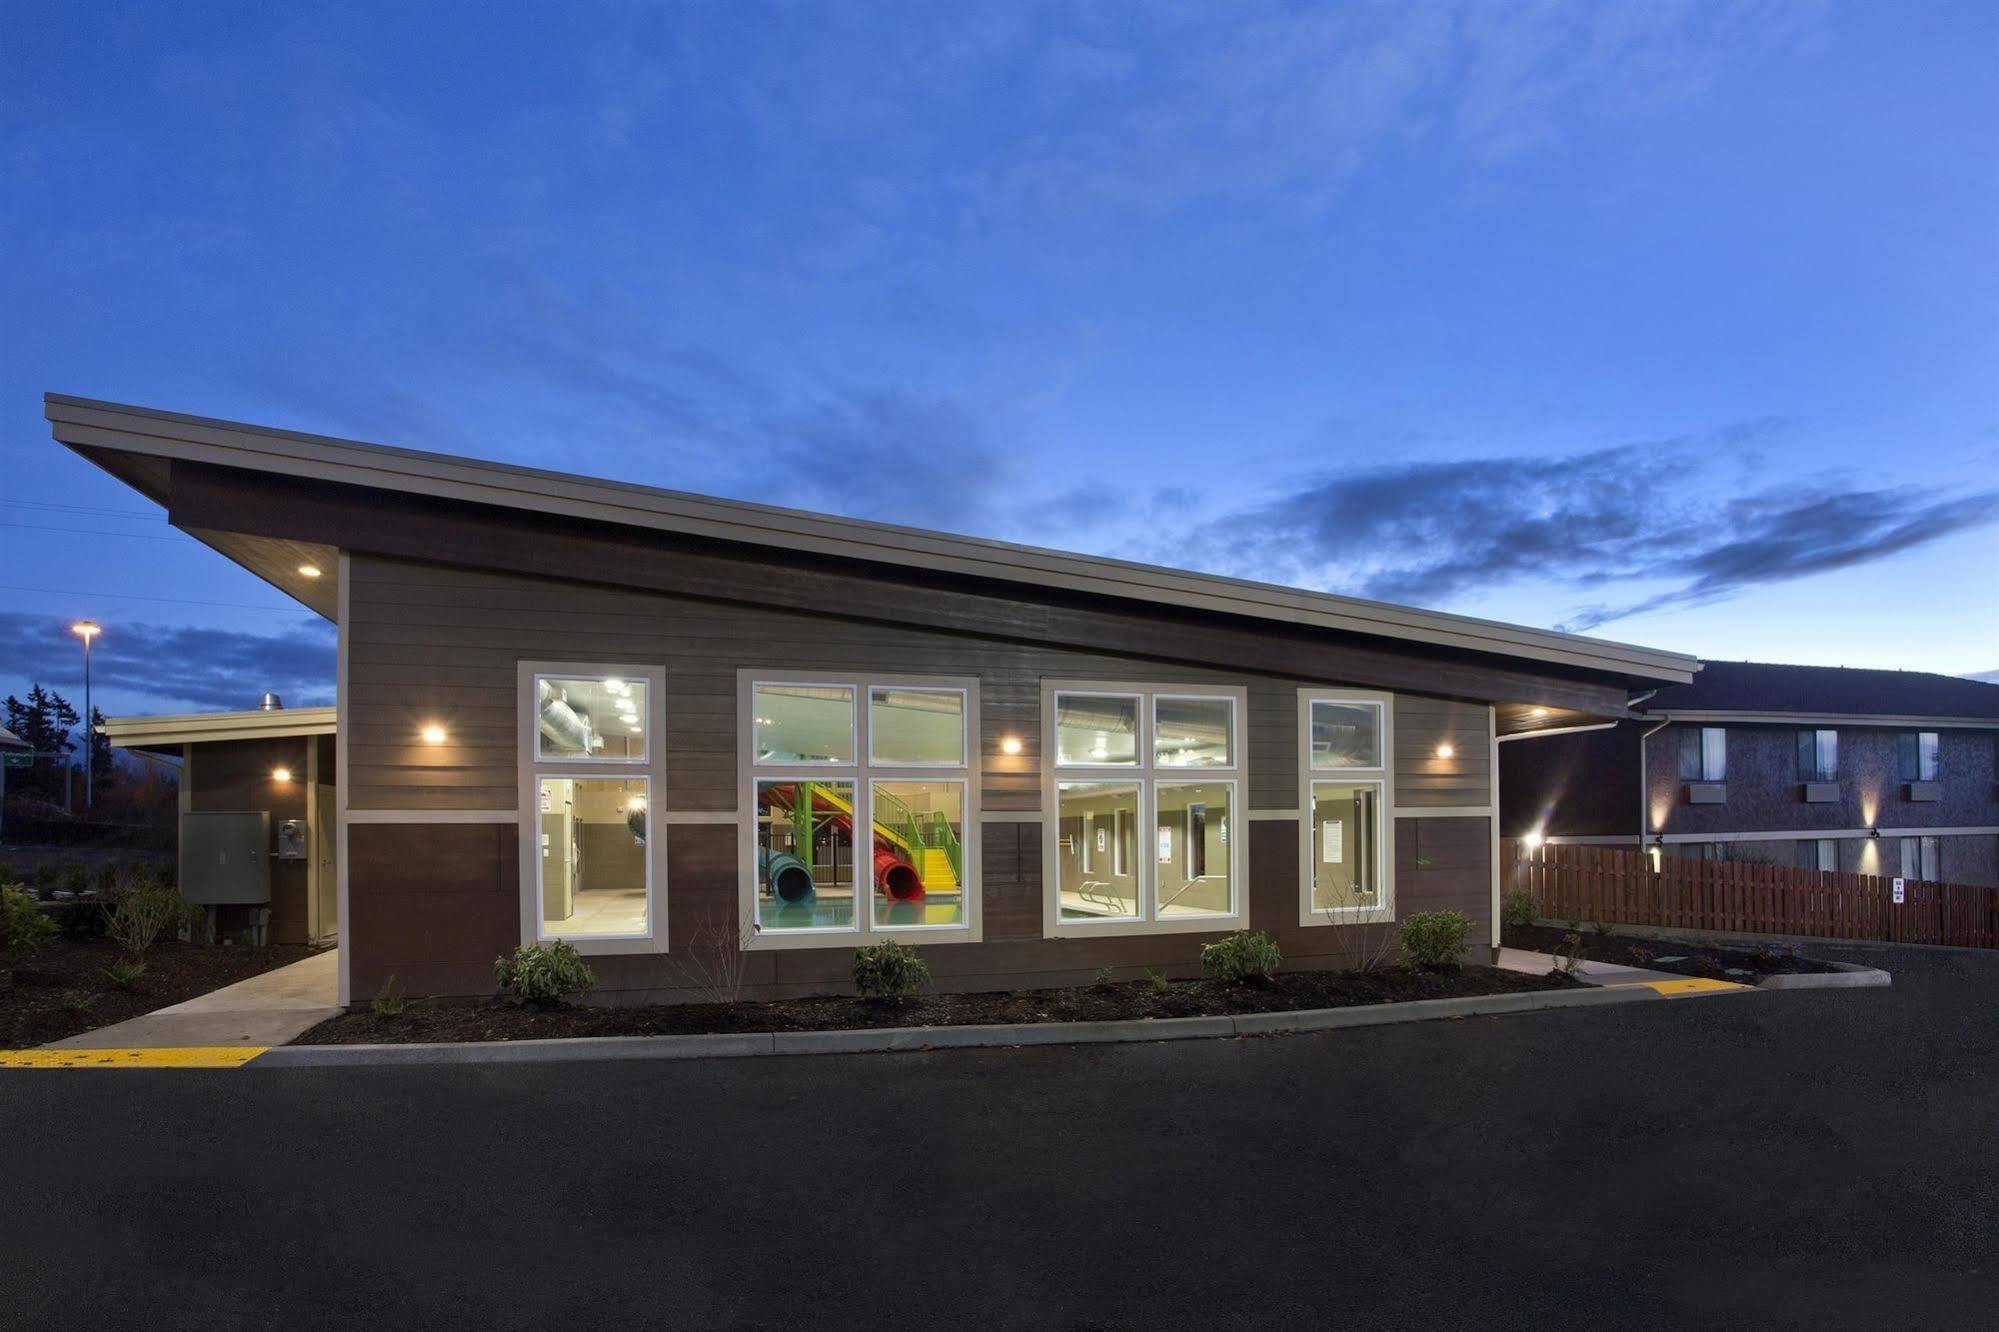 Red Lion Inn And Suites Federal Way Exterior photo